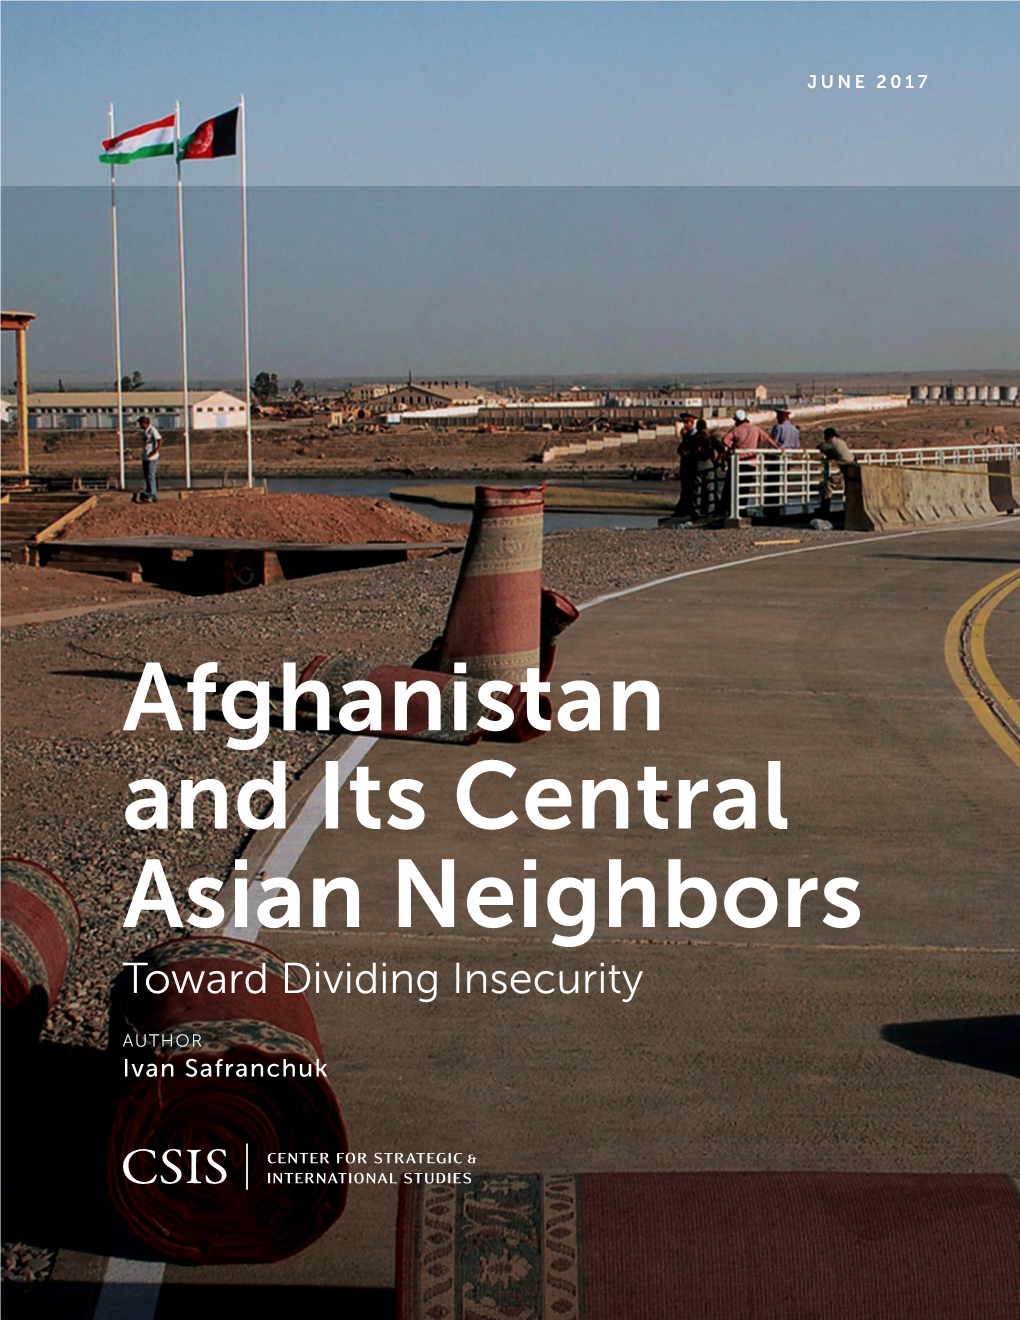 Afghanistan and Its Central Asian Neighbors: Toward Dividing Insecurity